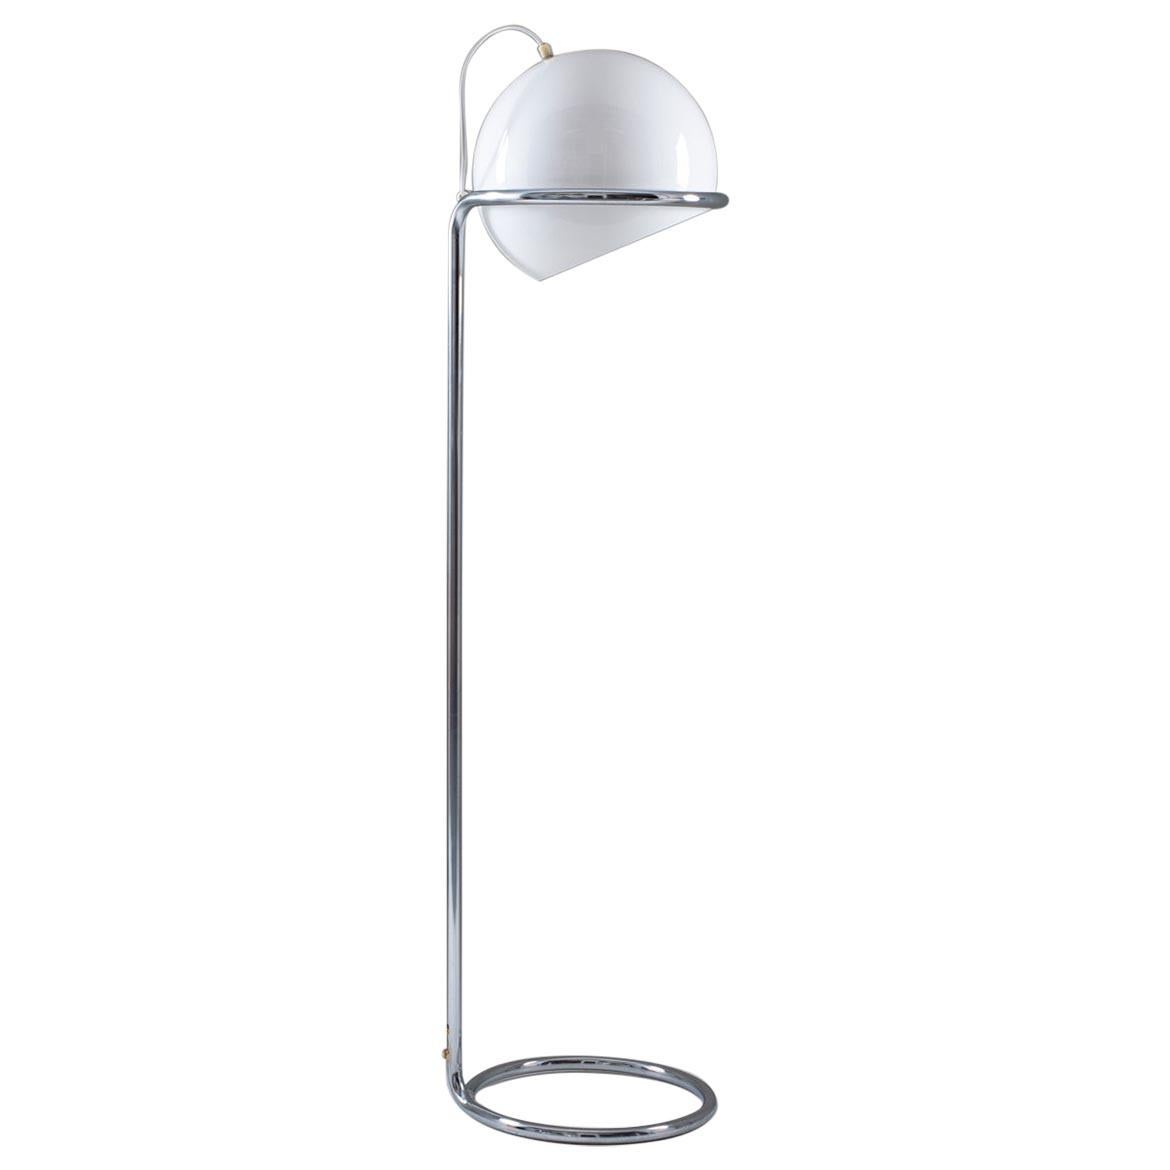 Scandinavian Midcentury Floor Lamp in Chrome and Acrylic by Bergboms